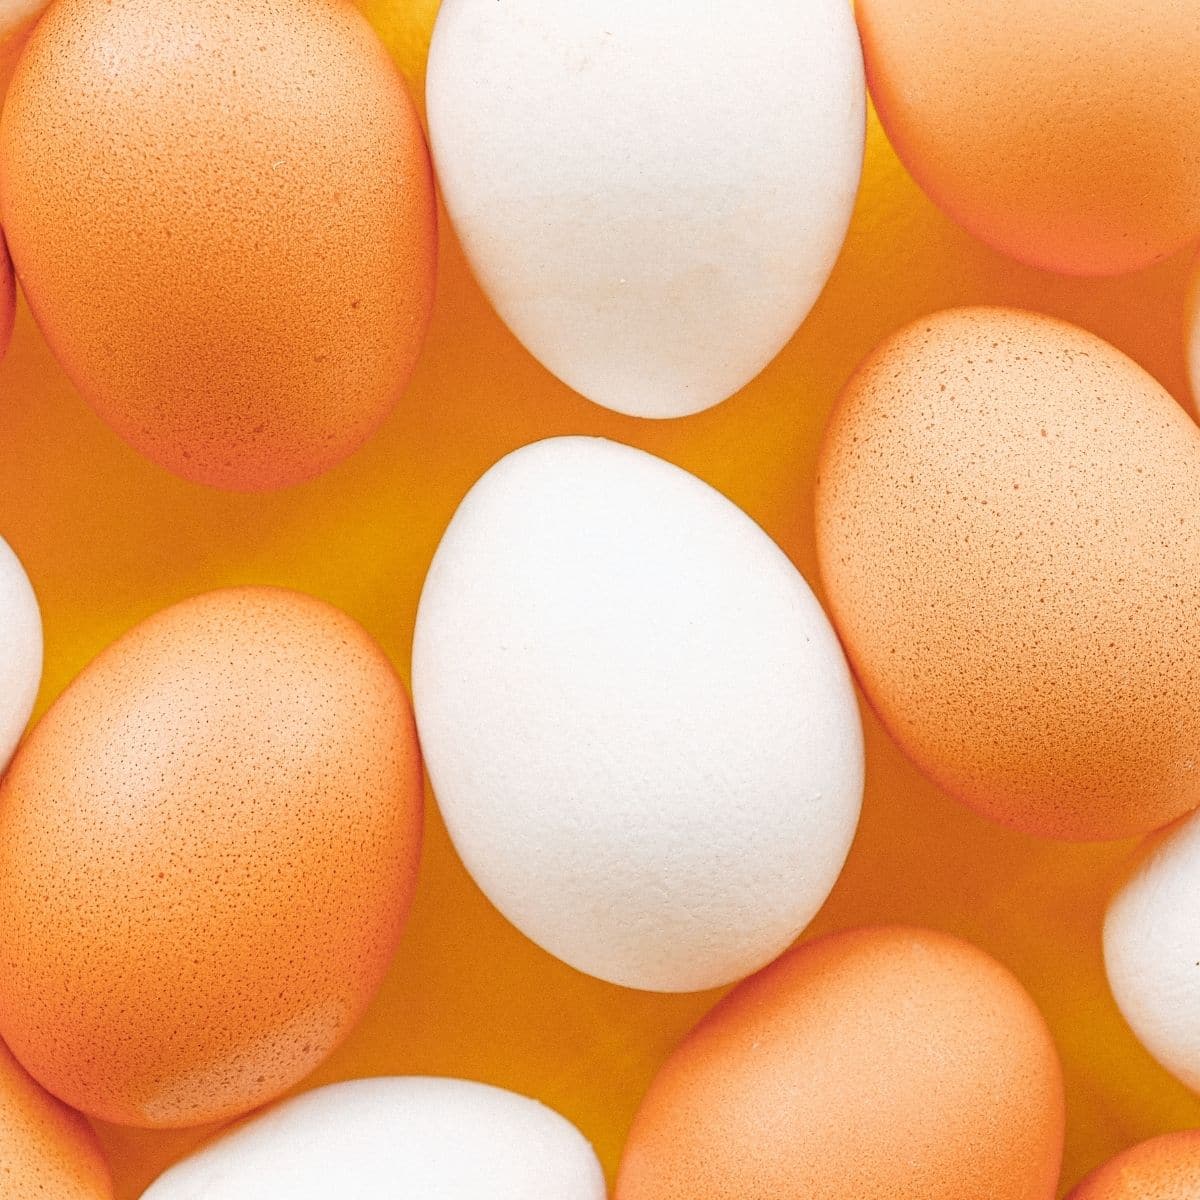 Best eqq substitute square image of assorted whole brown and white eggs.